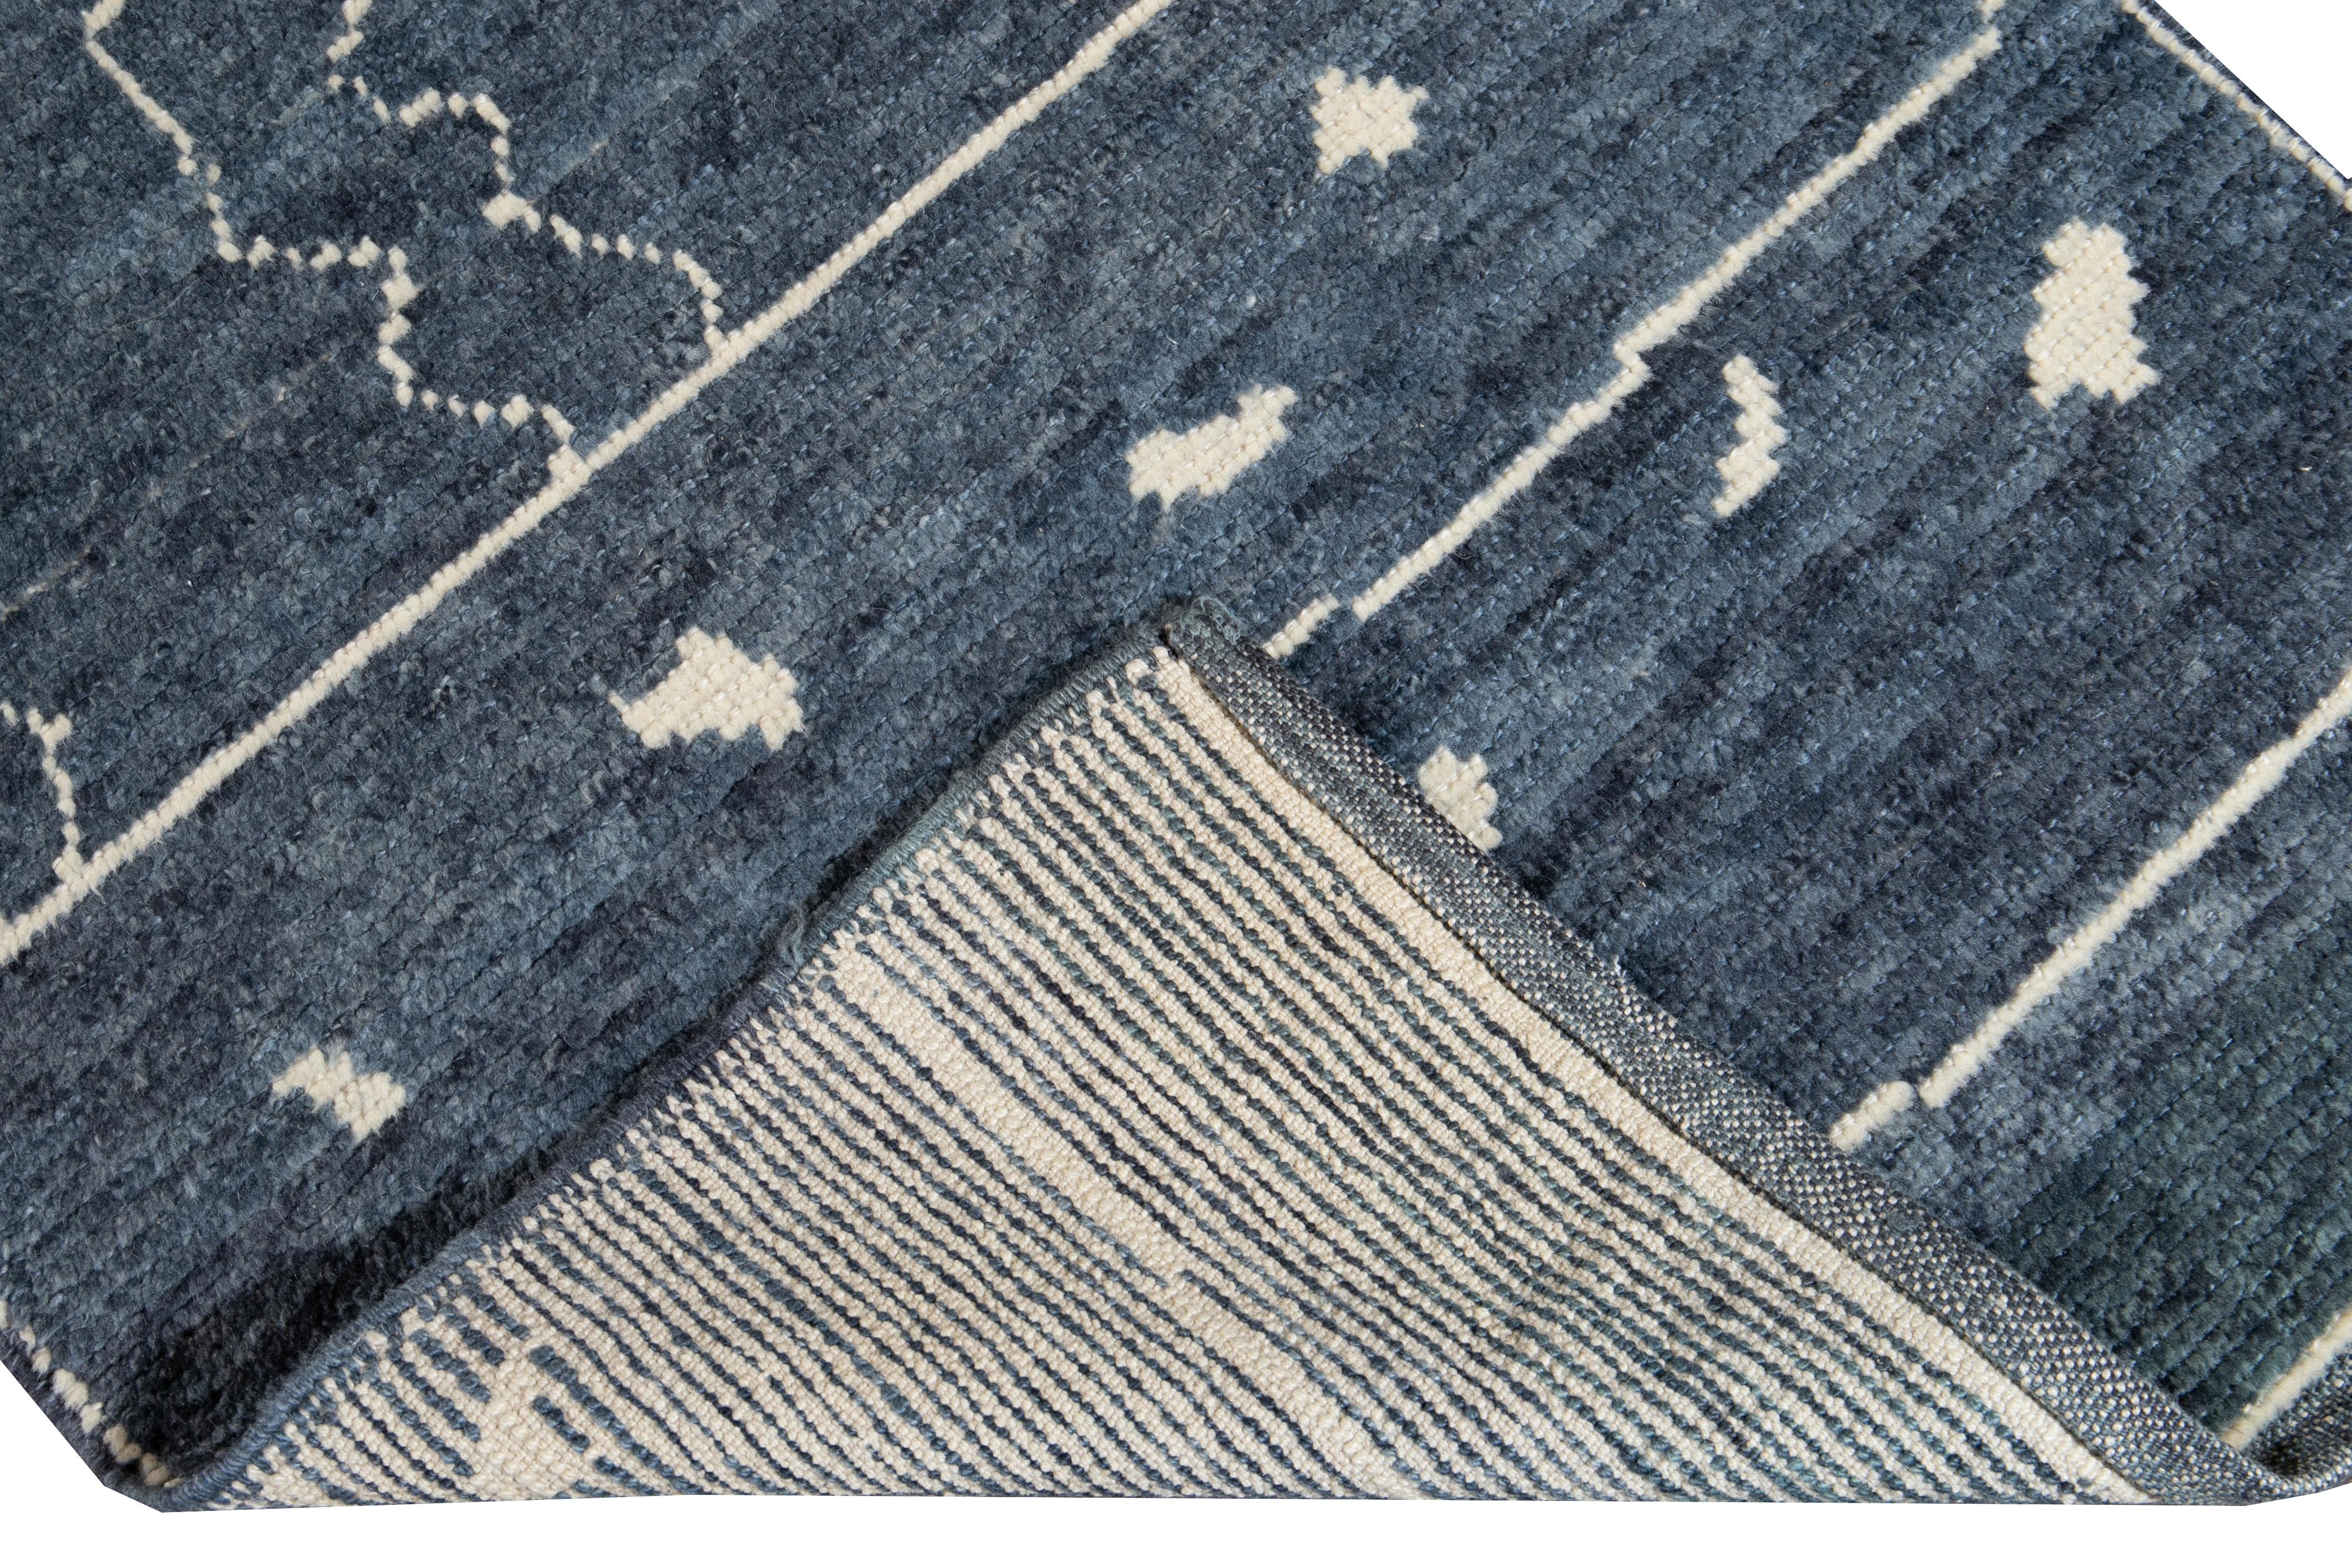 Beautiful contemporary Moroccan style runner hand-knotted wool rug with a navy-blue field. This Modern rug has an ivory accent in a gorgeous all-over geometric tribal design.

This rug measures: 3' x 13'9